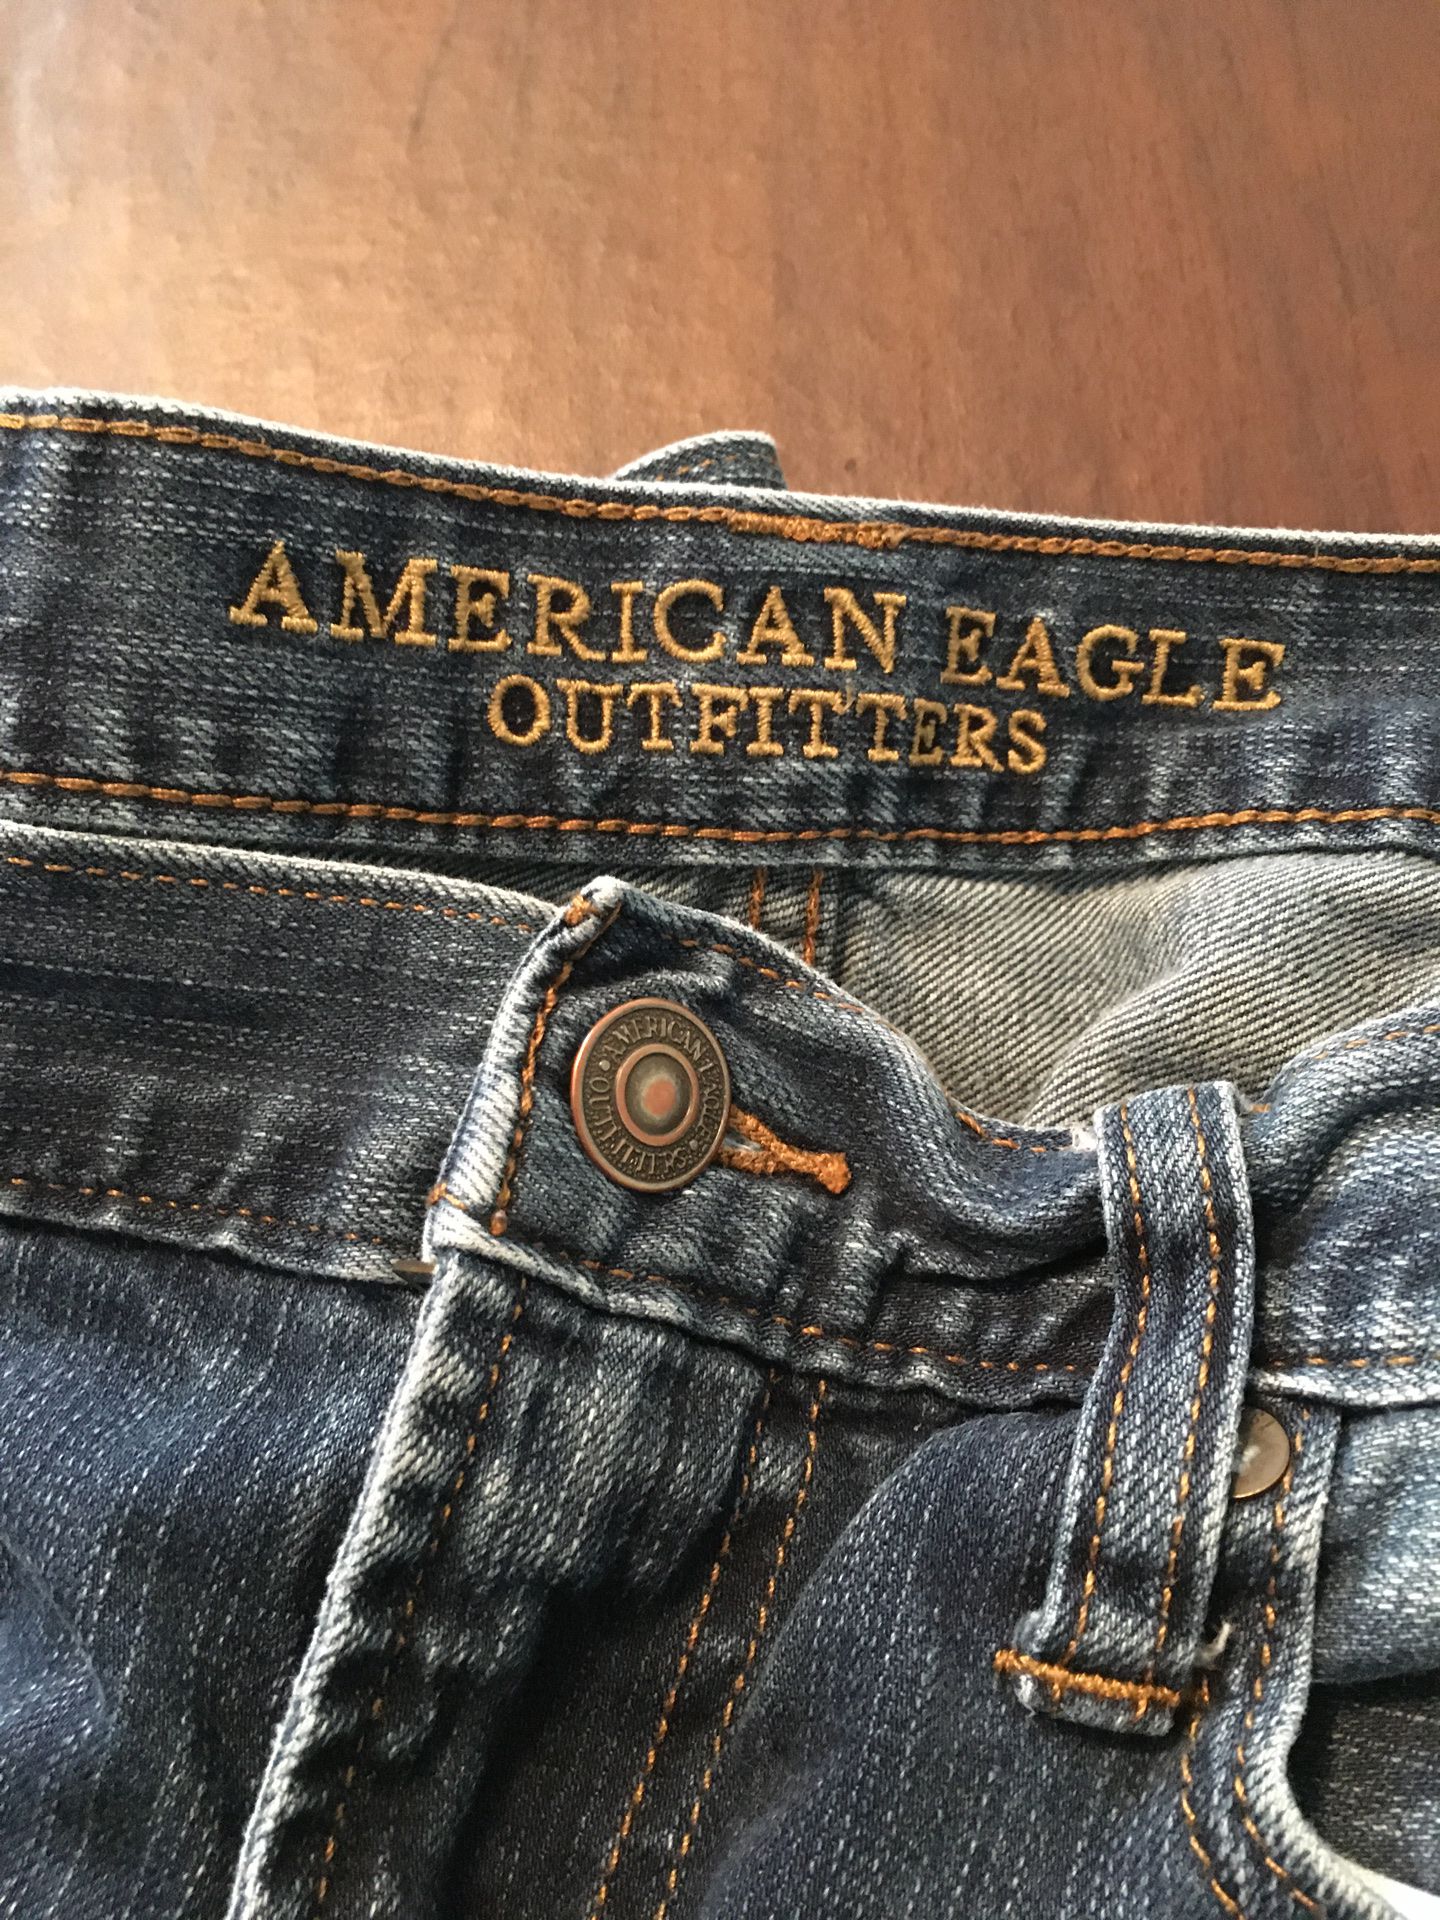 American Eagle men’s jeans 32x34 and three dress shirts mediums All For $20 Porch Pick Up